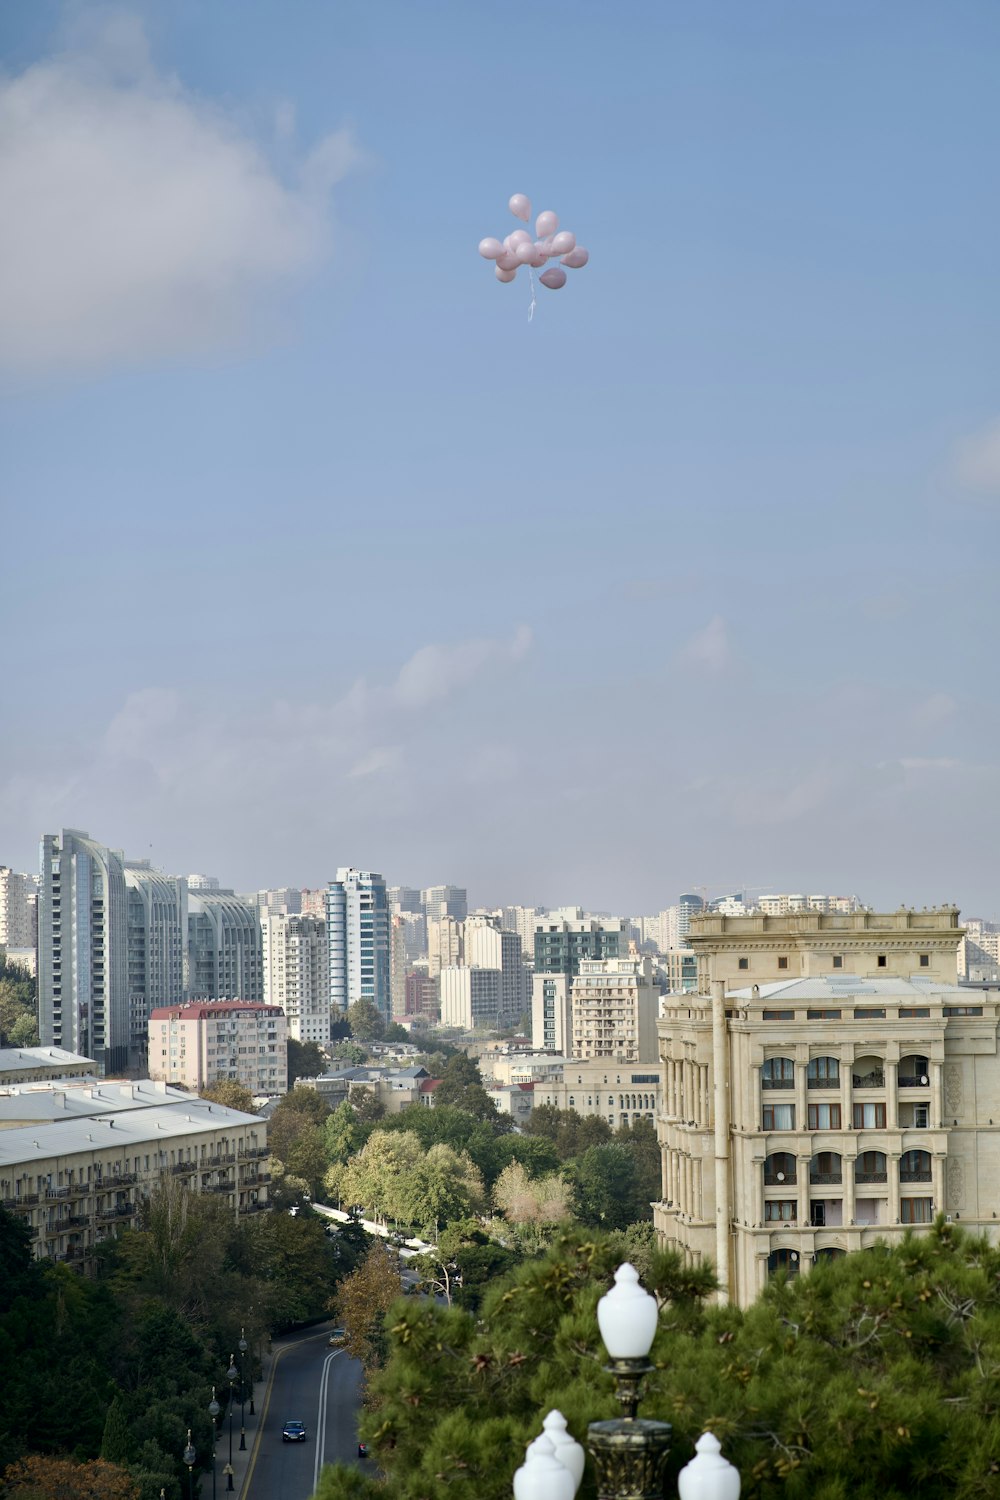 a couple of kites flying over a city